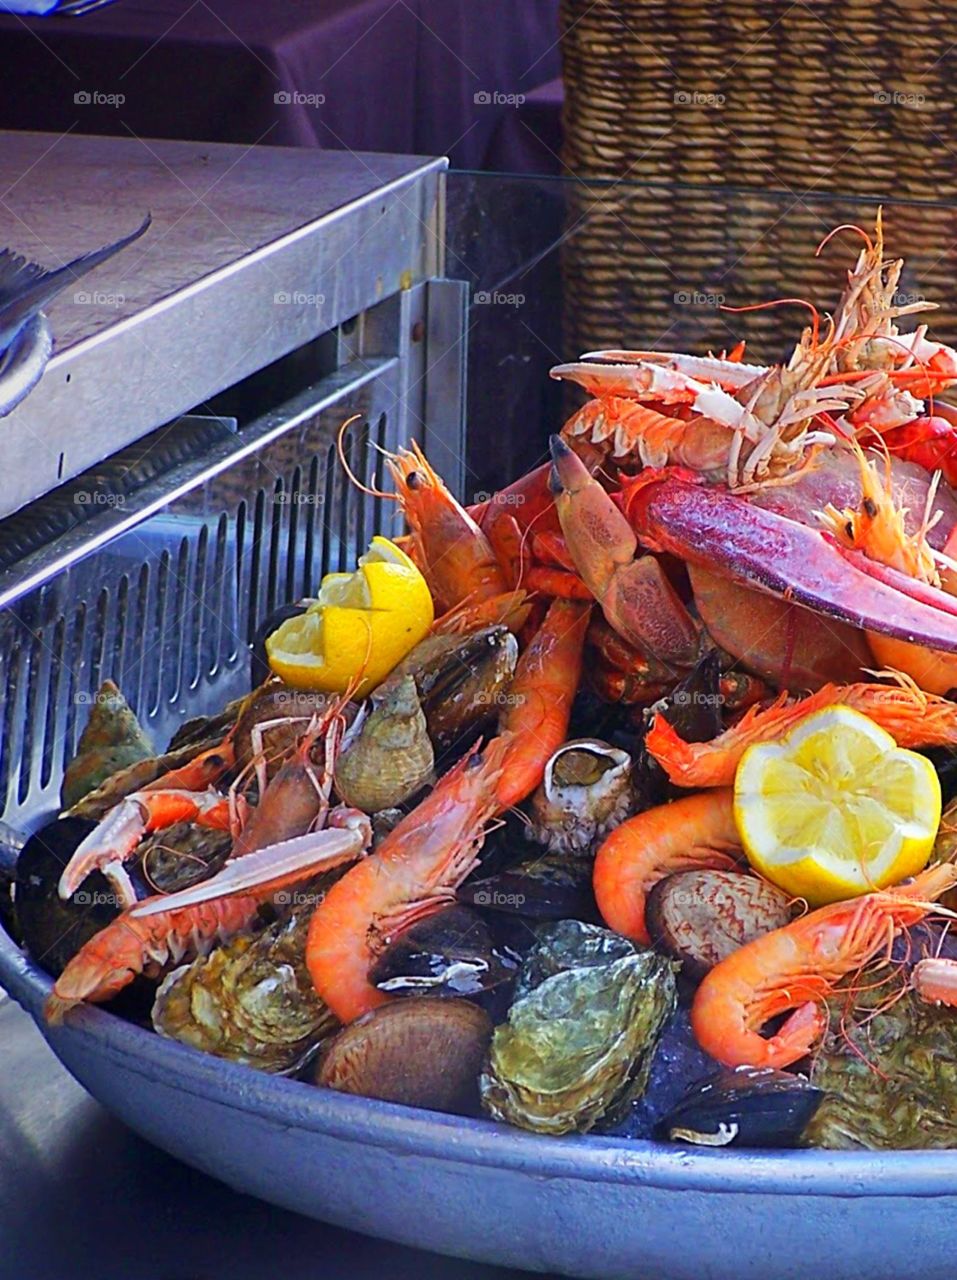 Seafood in Provence, In the south of France